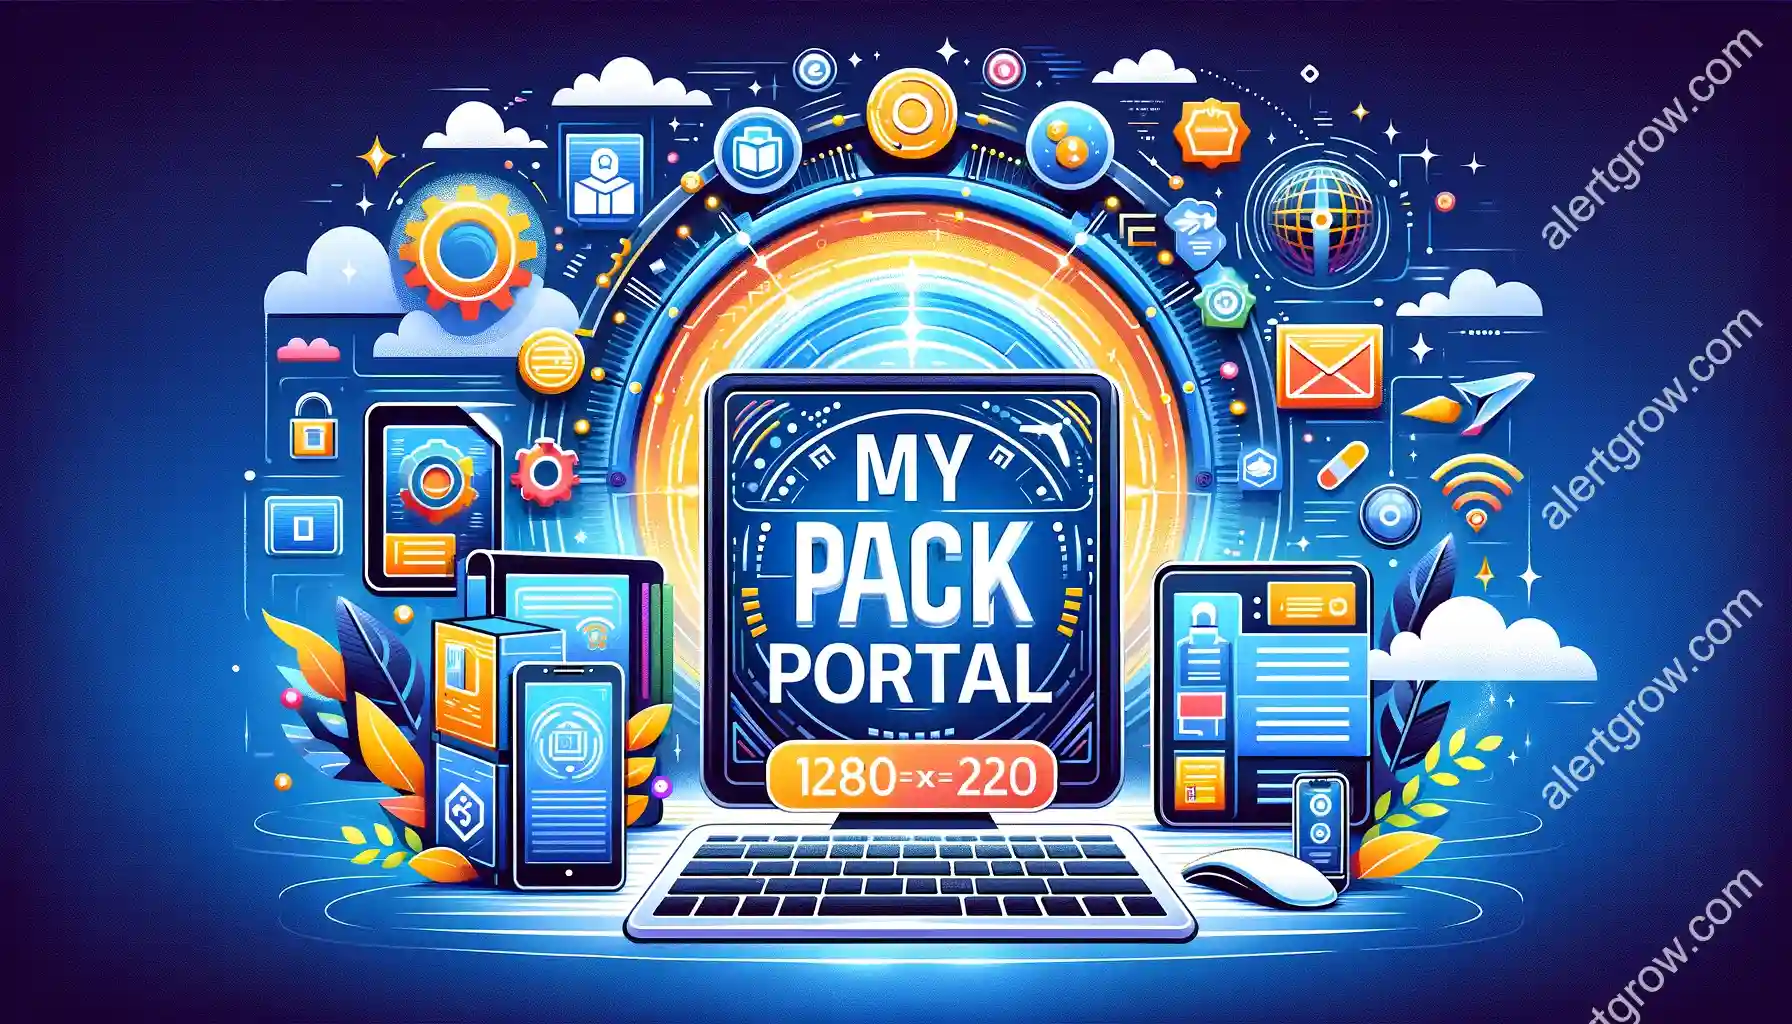 What is My Pack Portal